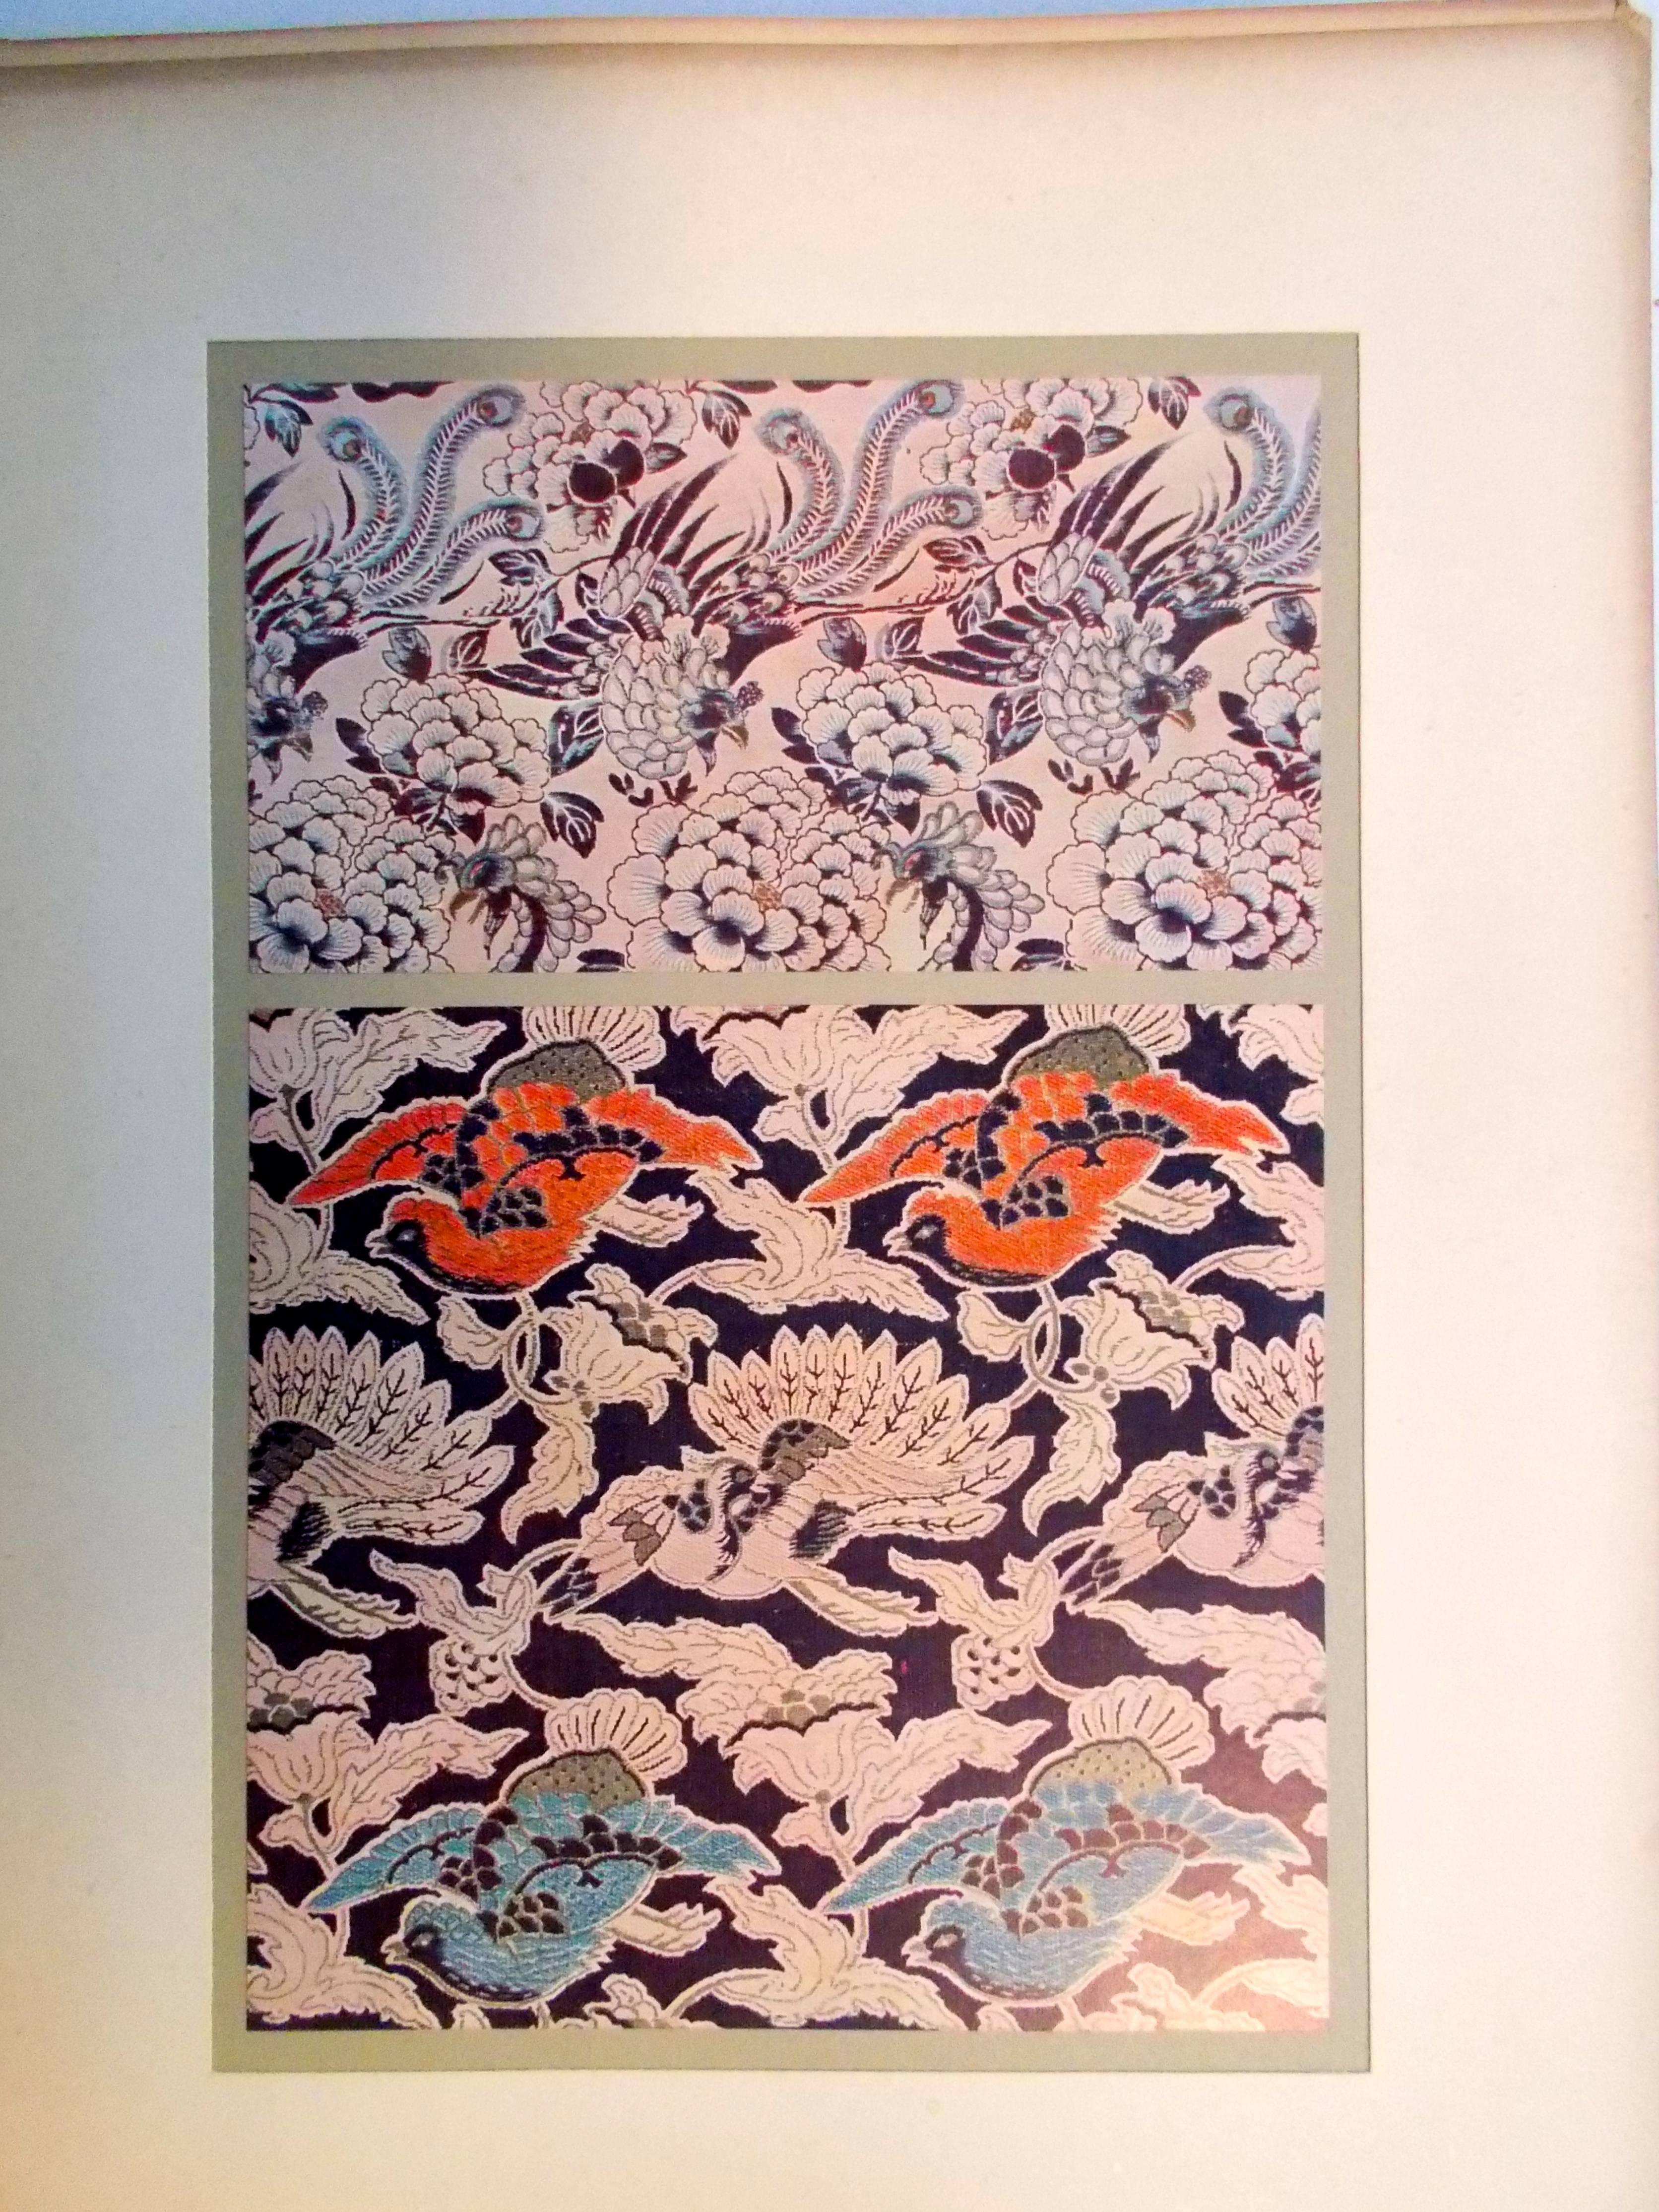 French Etoffes Japonaises 'Tissues Et Brochees' Complete Folio of Fabric Designs For Sale